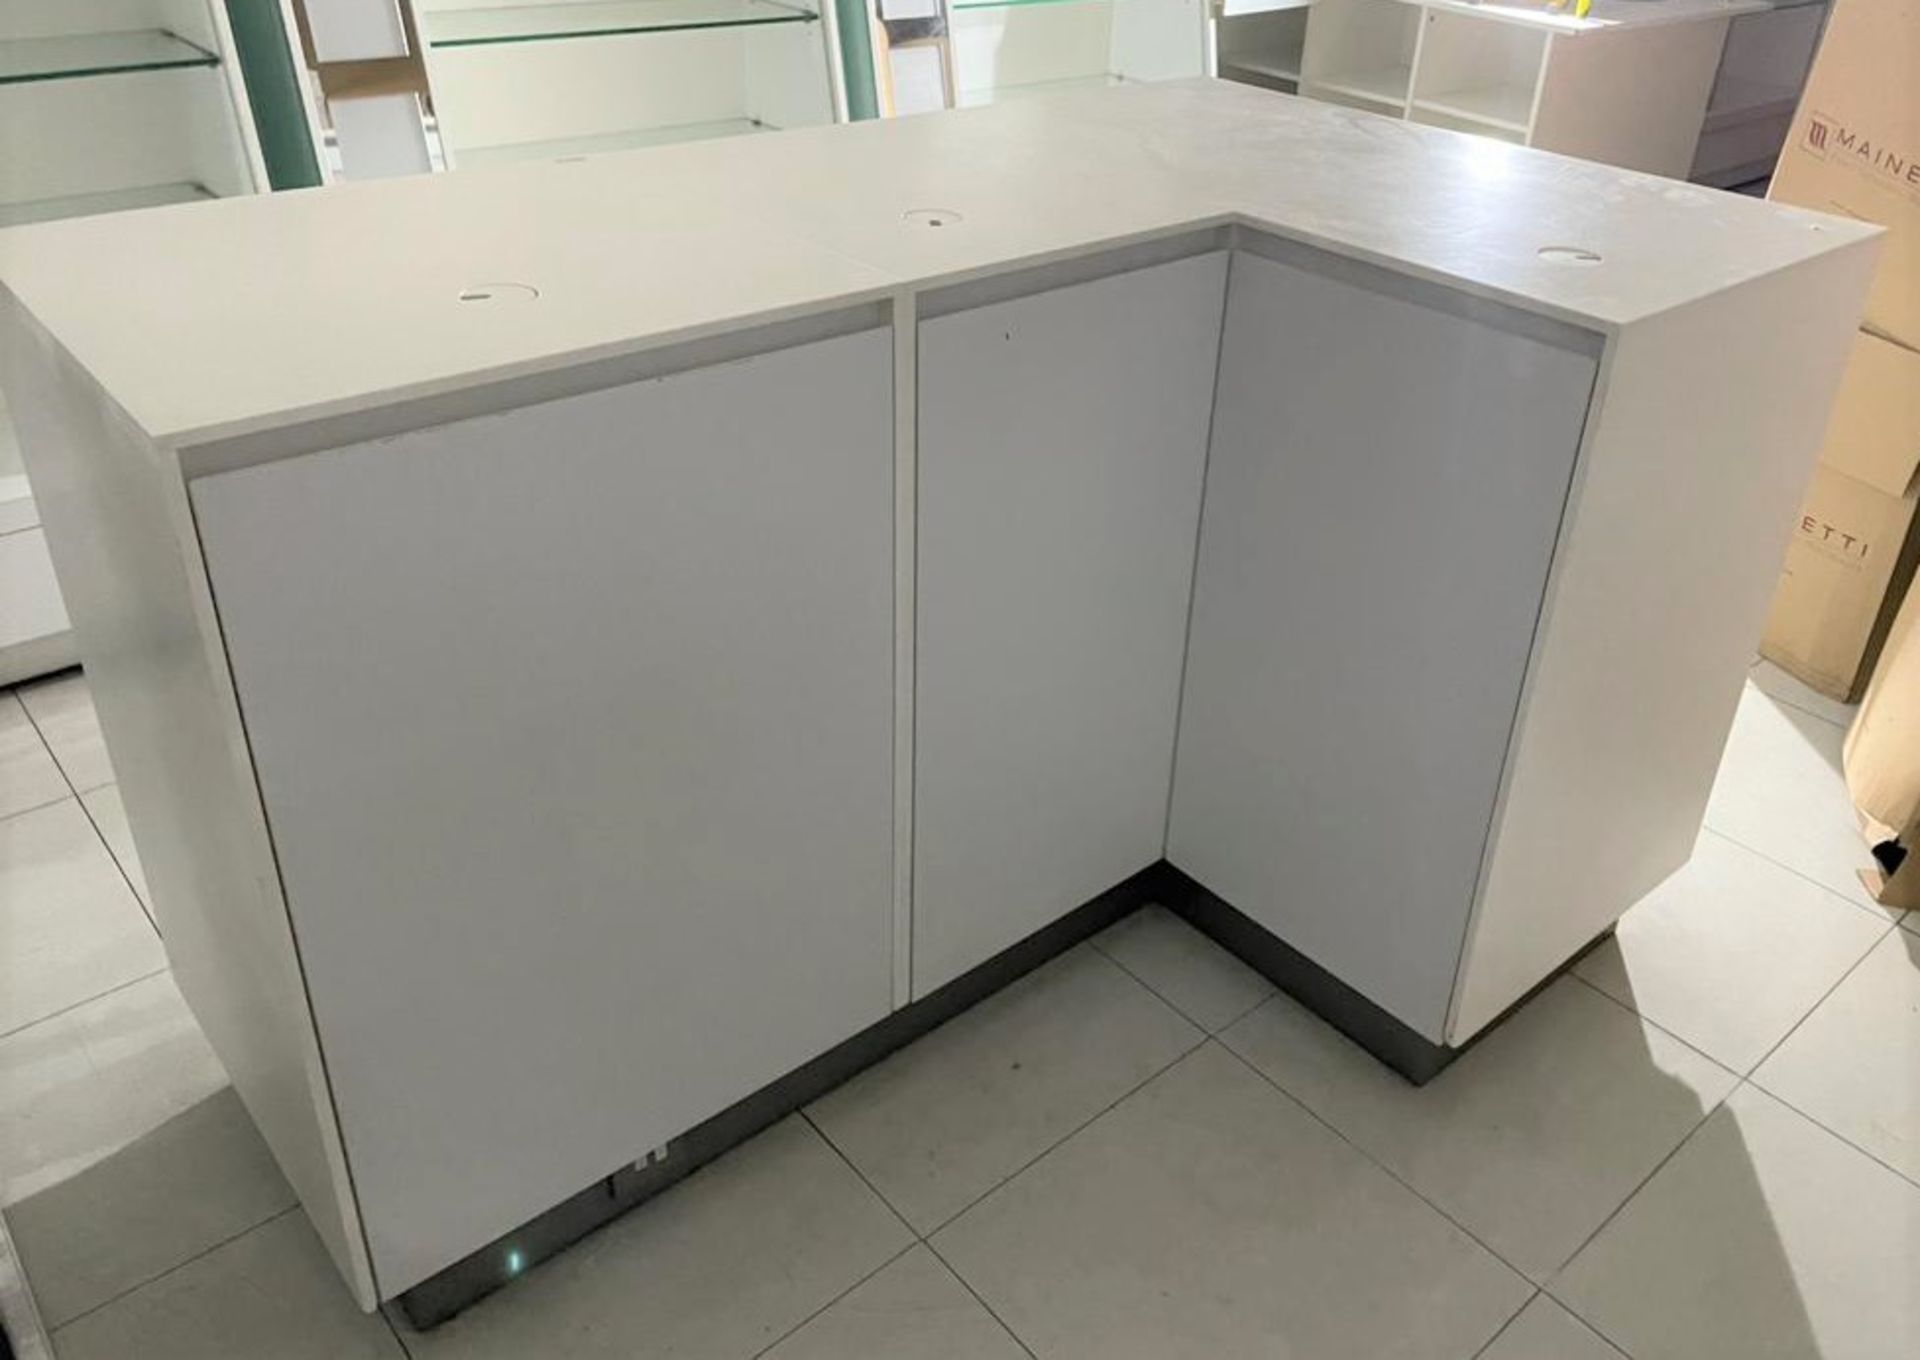 1 x L Shape Retail Counter in White With Advertising Light Boxes and Storage Cabinets With Cable - Image 17 of 19